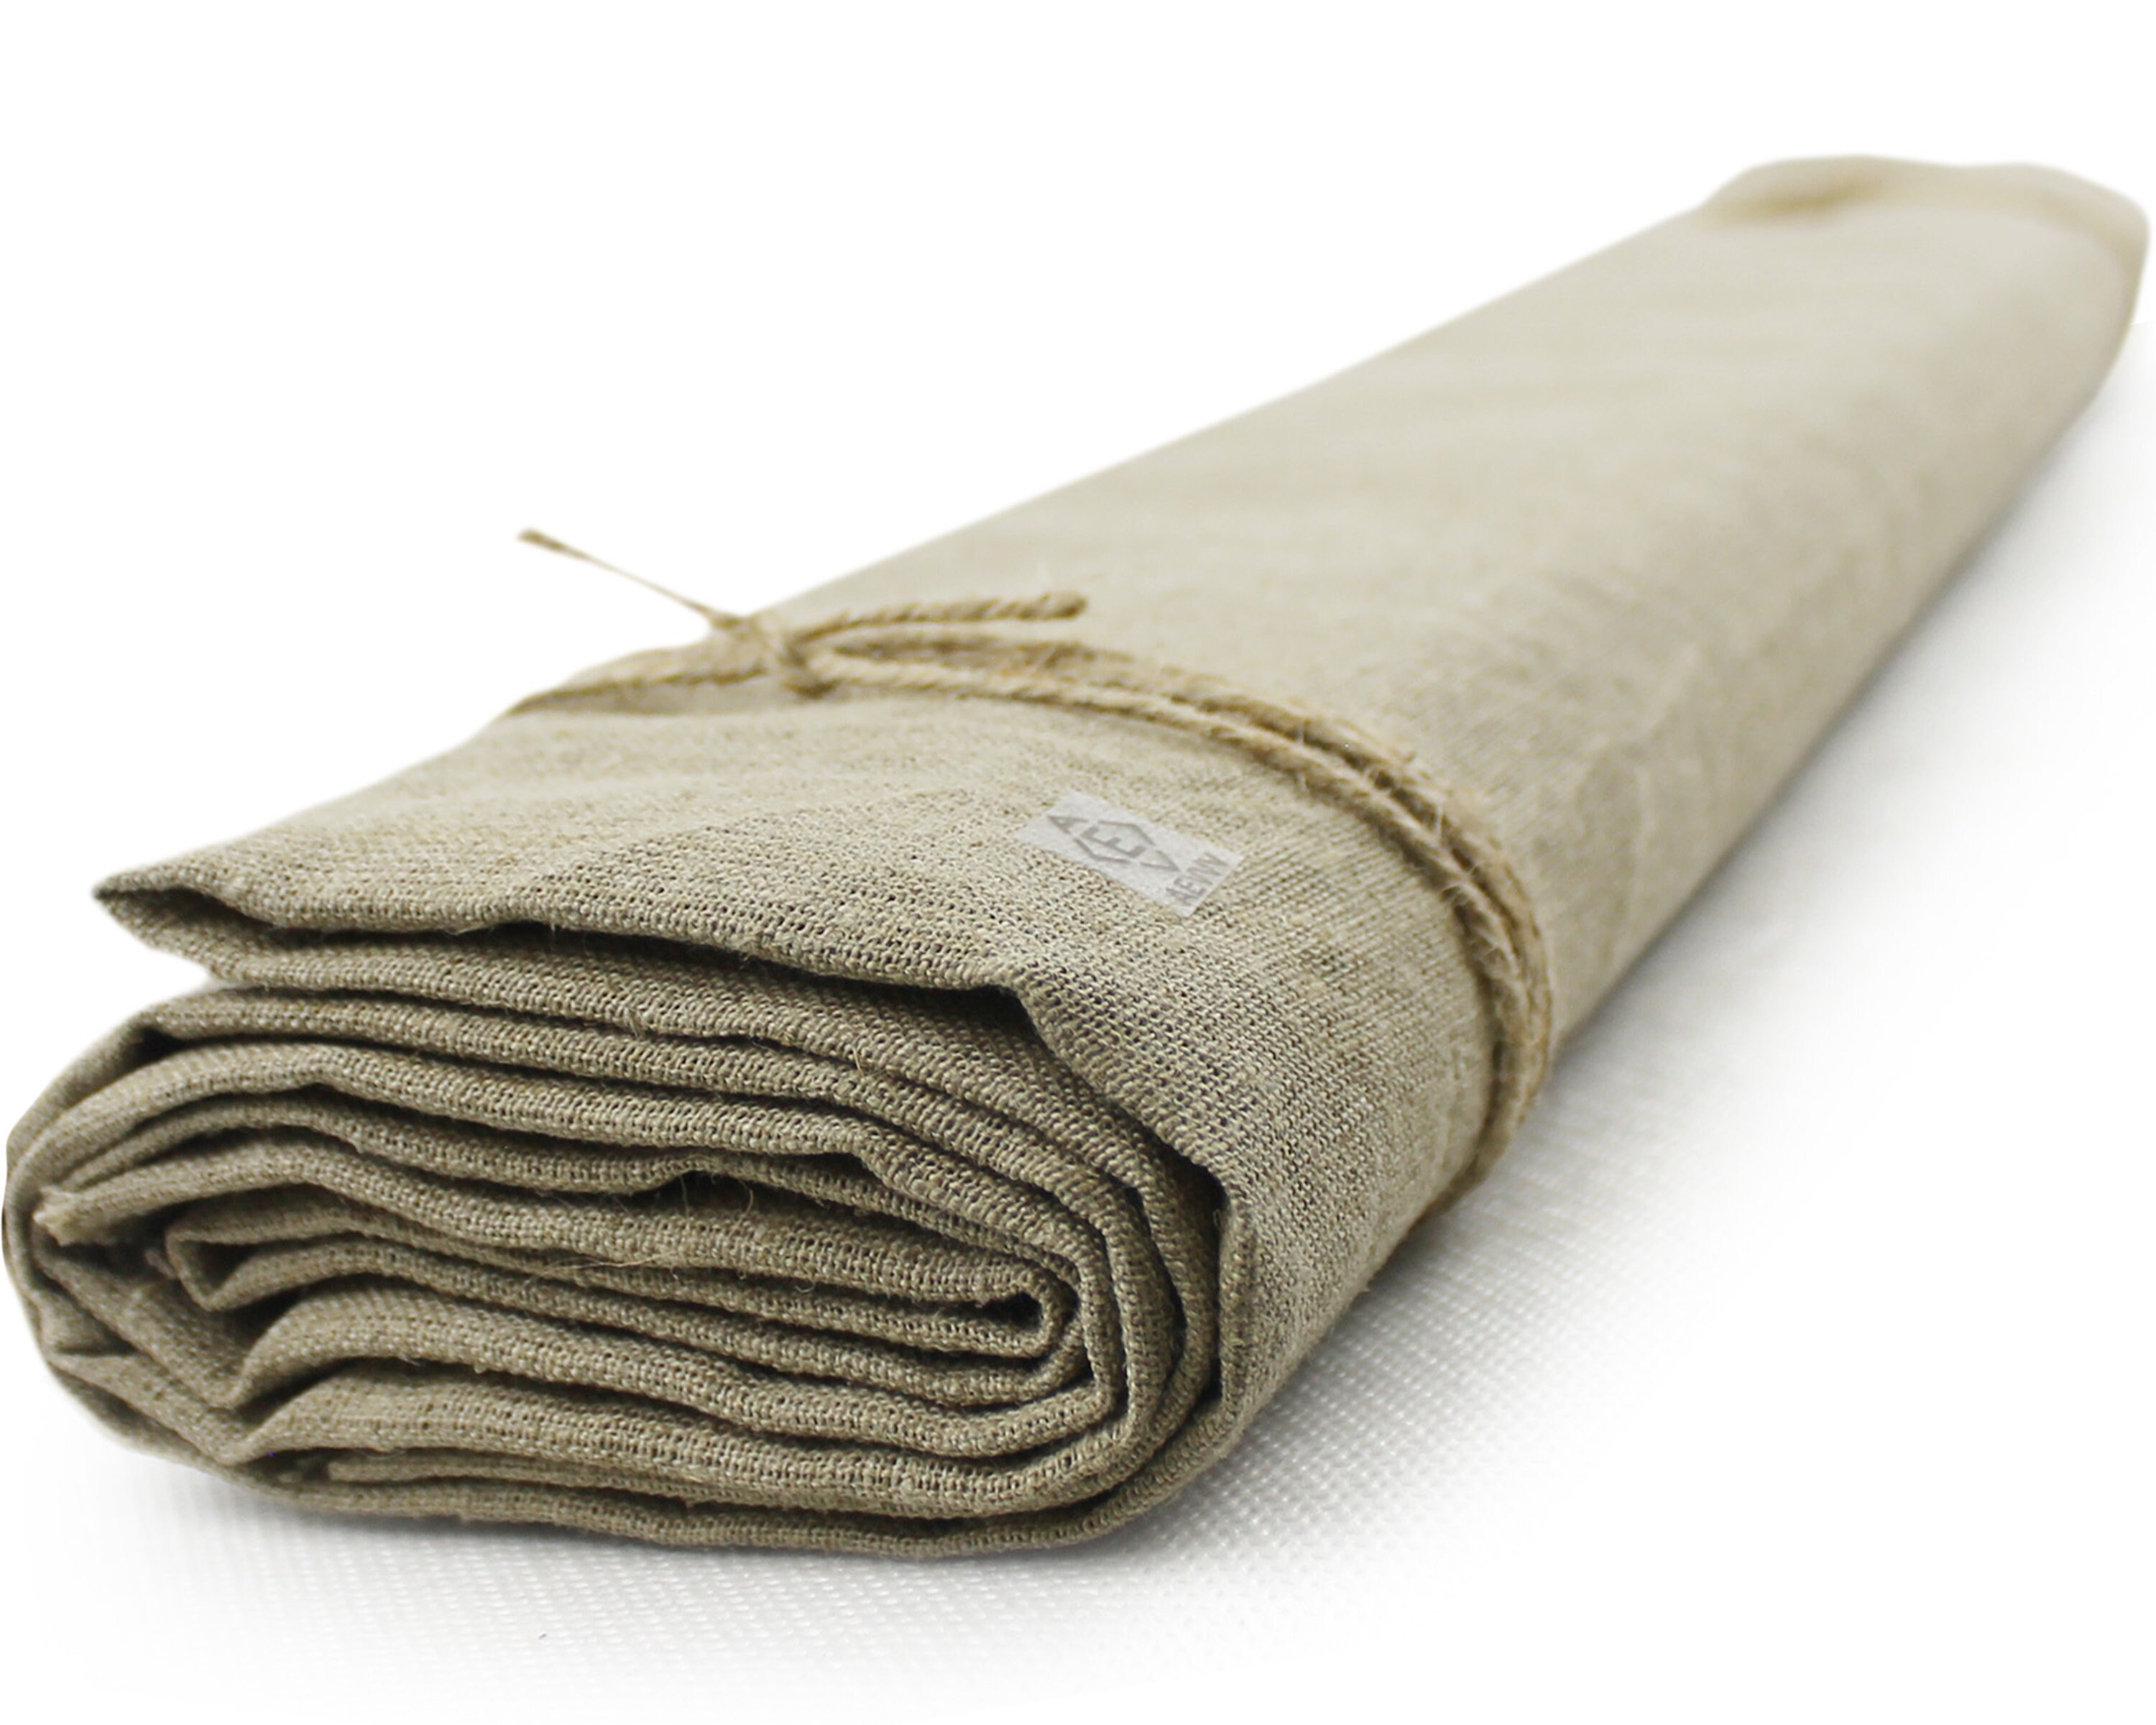 Natural Linen Canvas Roll 69 inch Wide x 4 Yard Long - Plain Unprimed  Canvas Fabric for Painting - Raw Linen Canvas Rolled - Roll for Painting  Layer